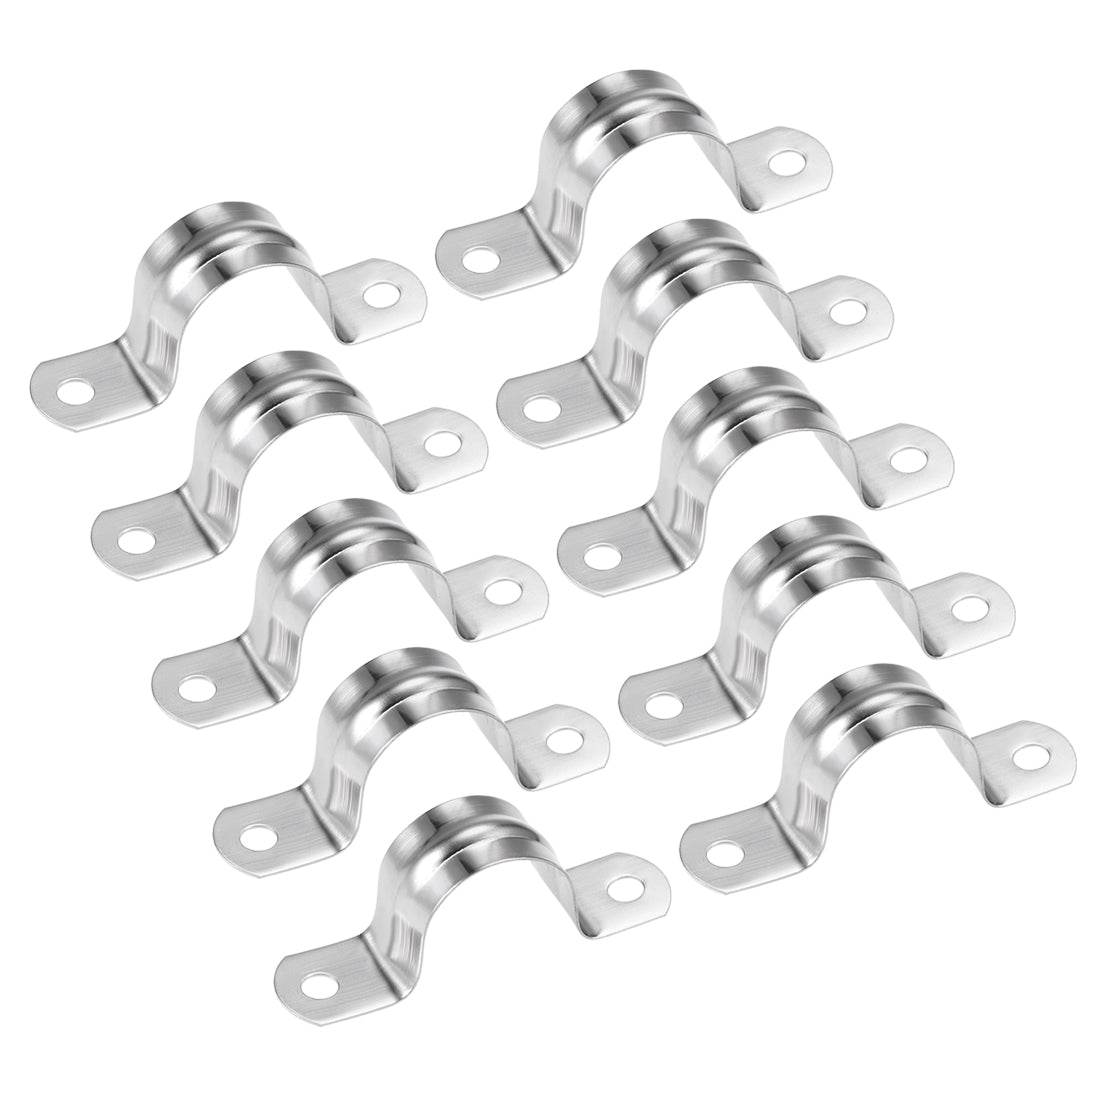 uxcell Uxcell U Shaped Conduit Clamp Saddle Strap Tube Pipe Clip Stainless Steel M25 10Pcs